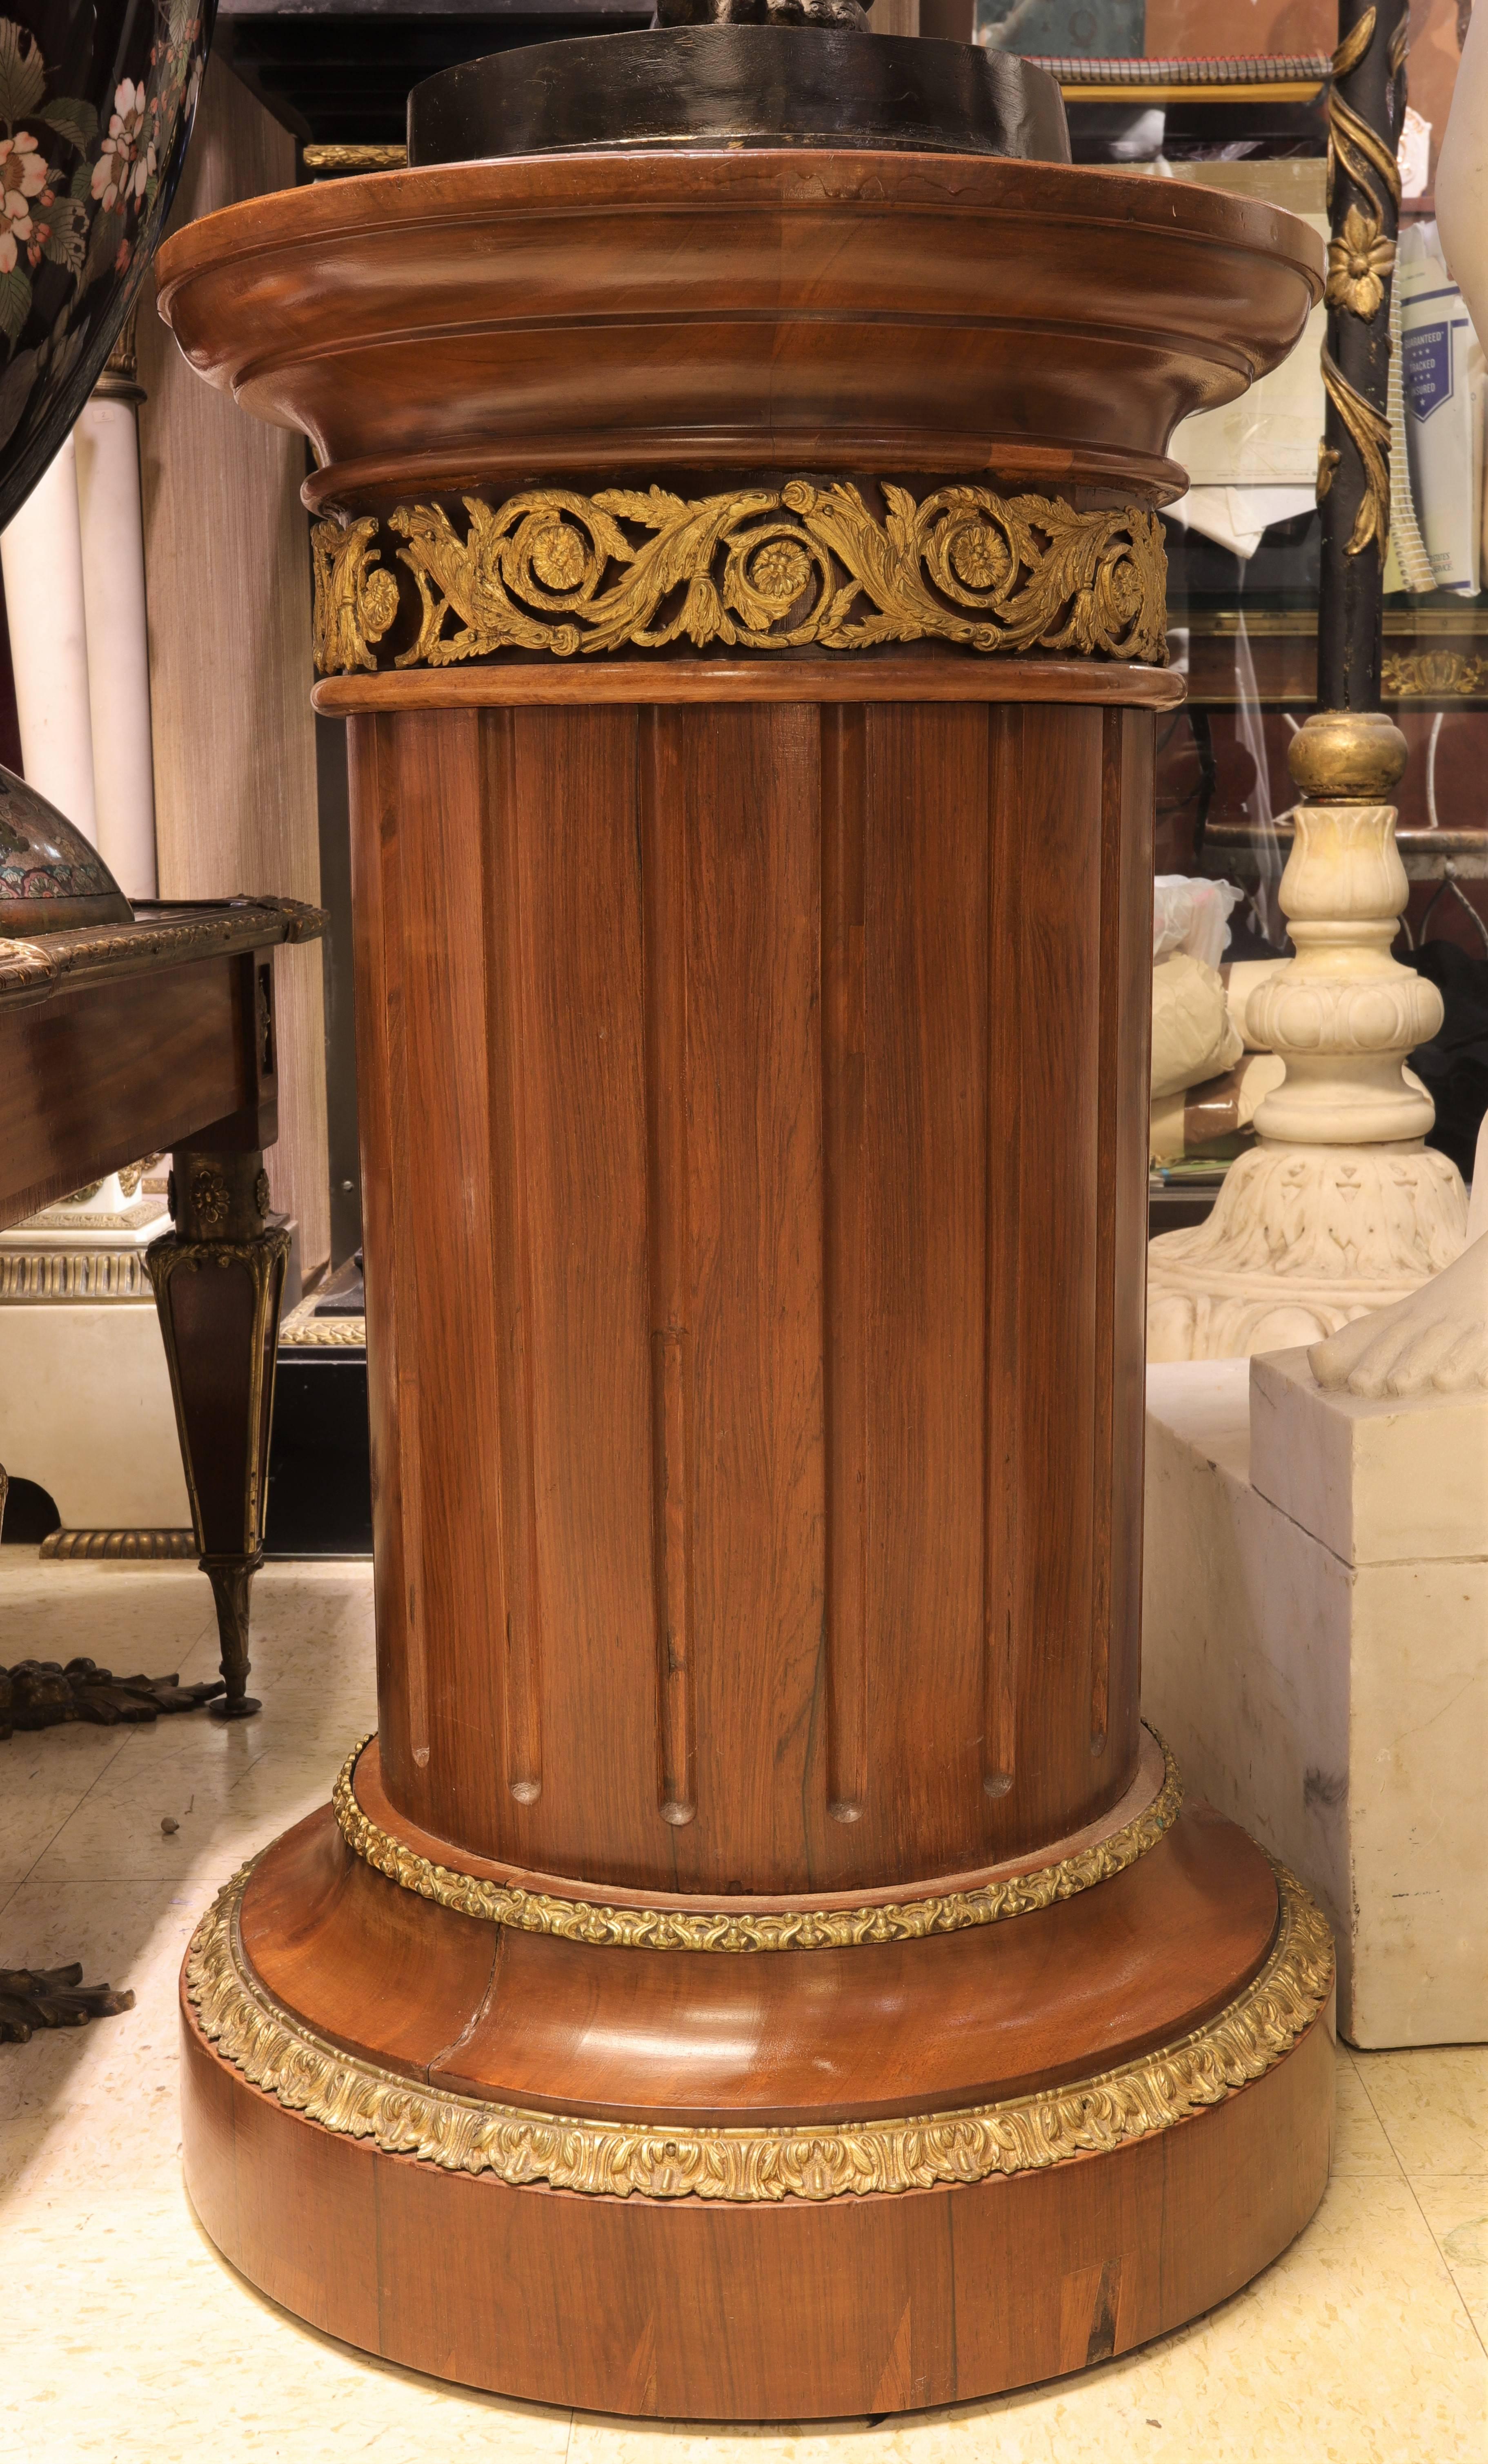 Pair of very fine French Louis XVI style bronze-mounted mahogany wood pedestals.